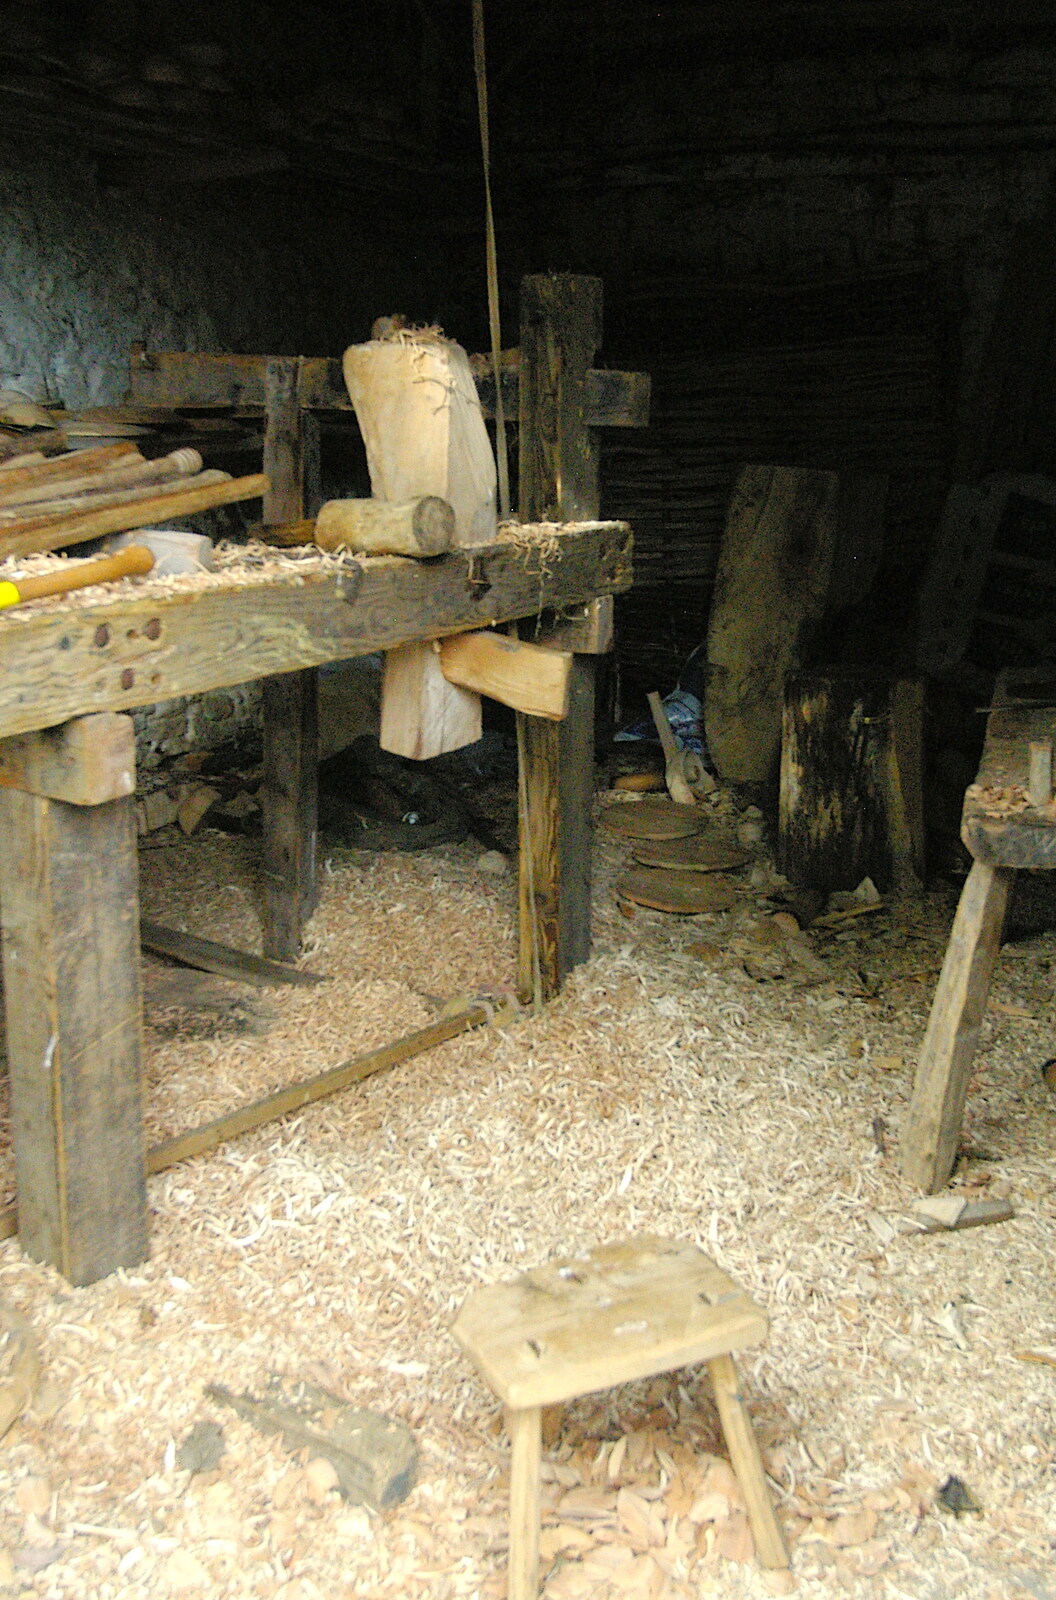 A woodworker's workshop, Lee Farm from The Pennine Way: Lost on Kinder Scout, Derbyshire - 9th October 2005